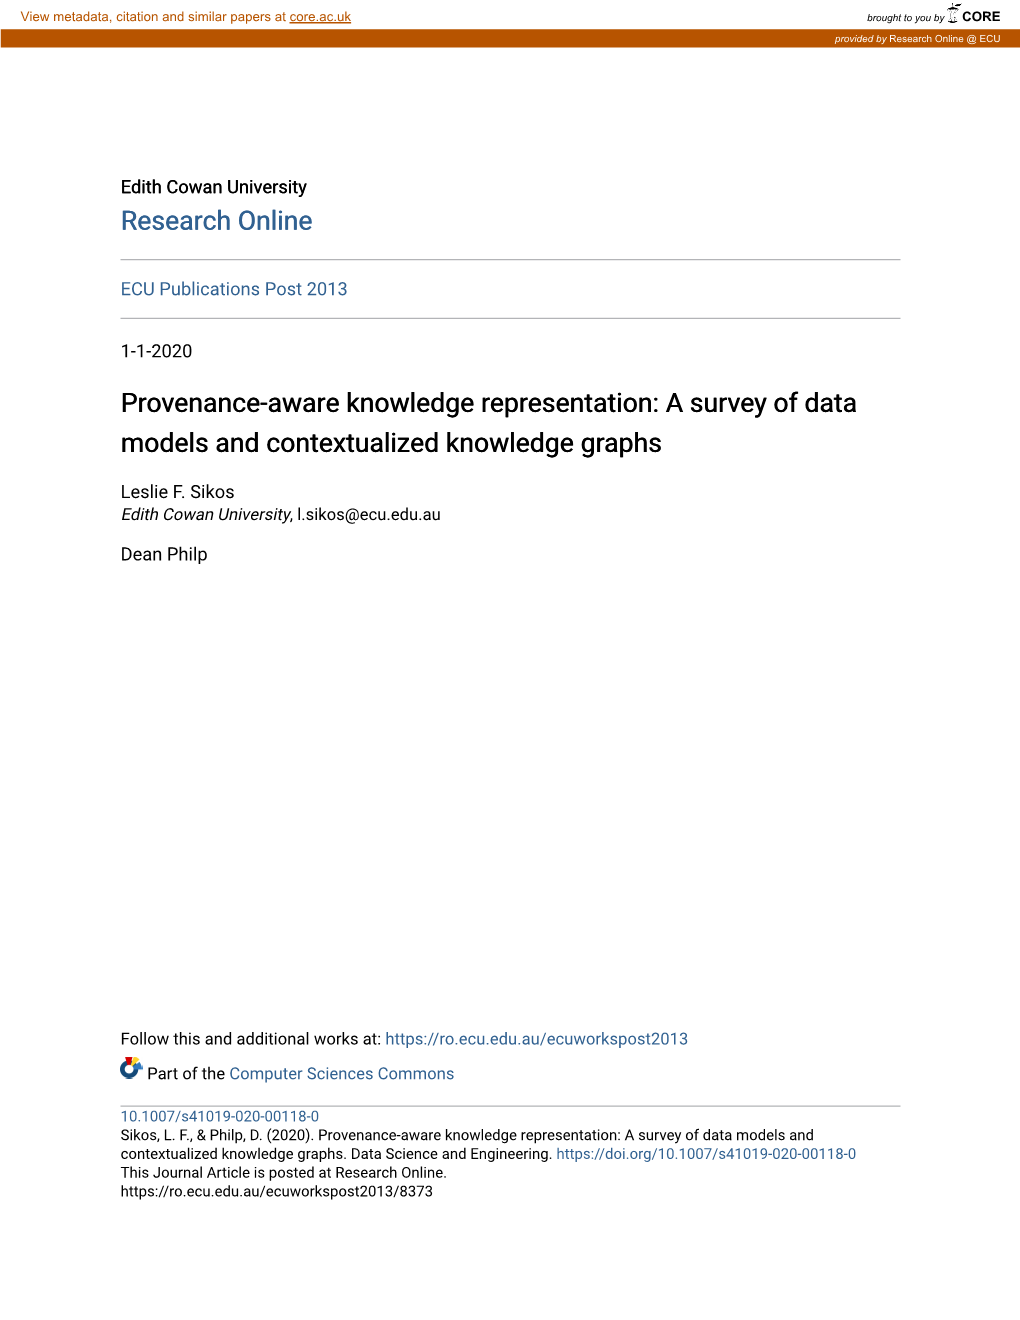 Provenance-Aware Knowledge Representation: a Survey of Data Models and Contextualized Knowledge Graphs